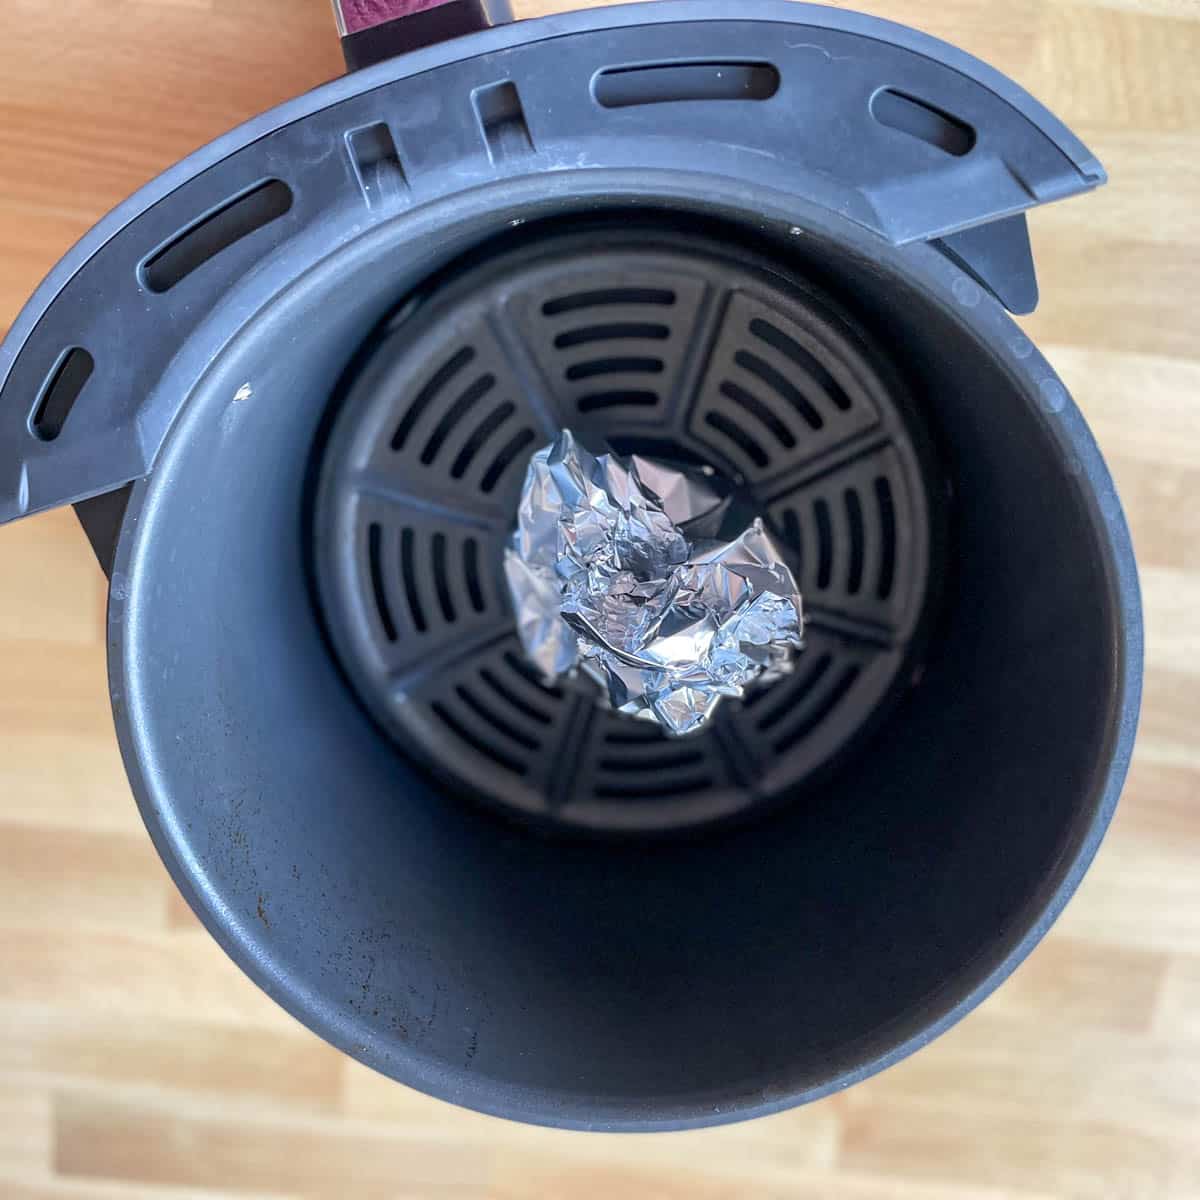 A ball of foil containing a cut head of garlic is shown in the basket of an air fryer.